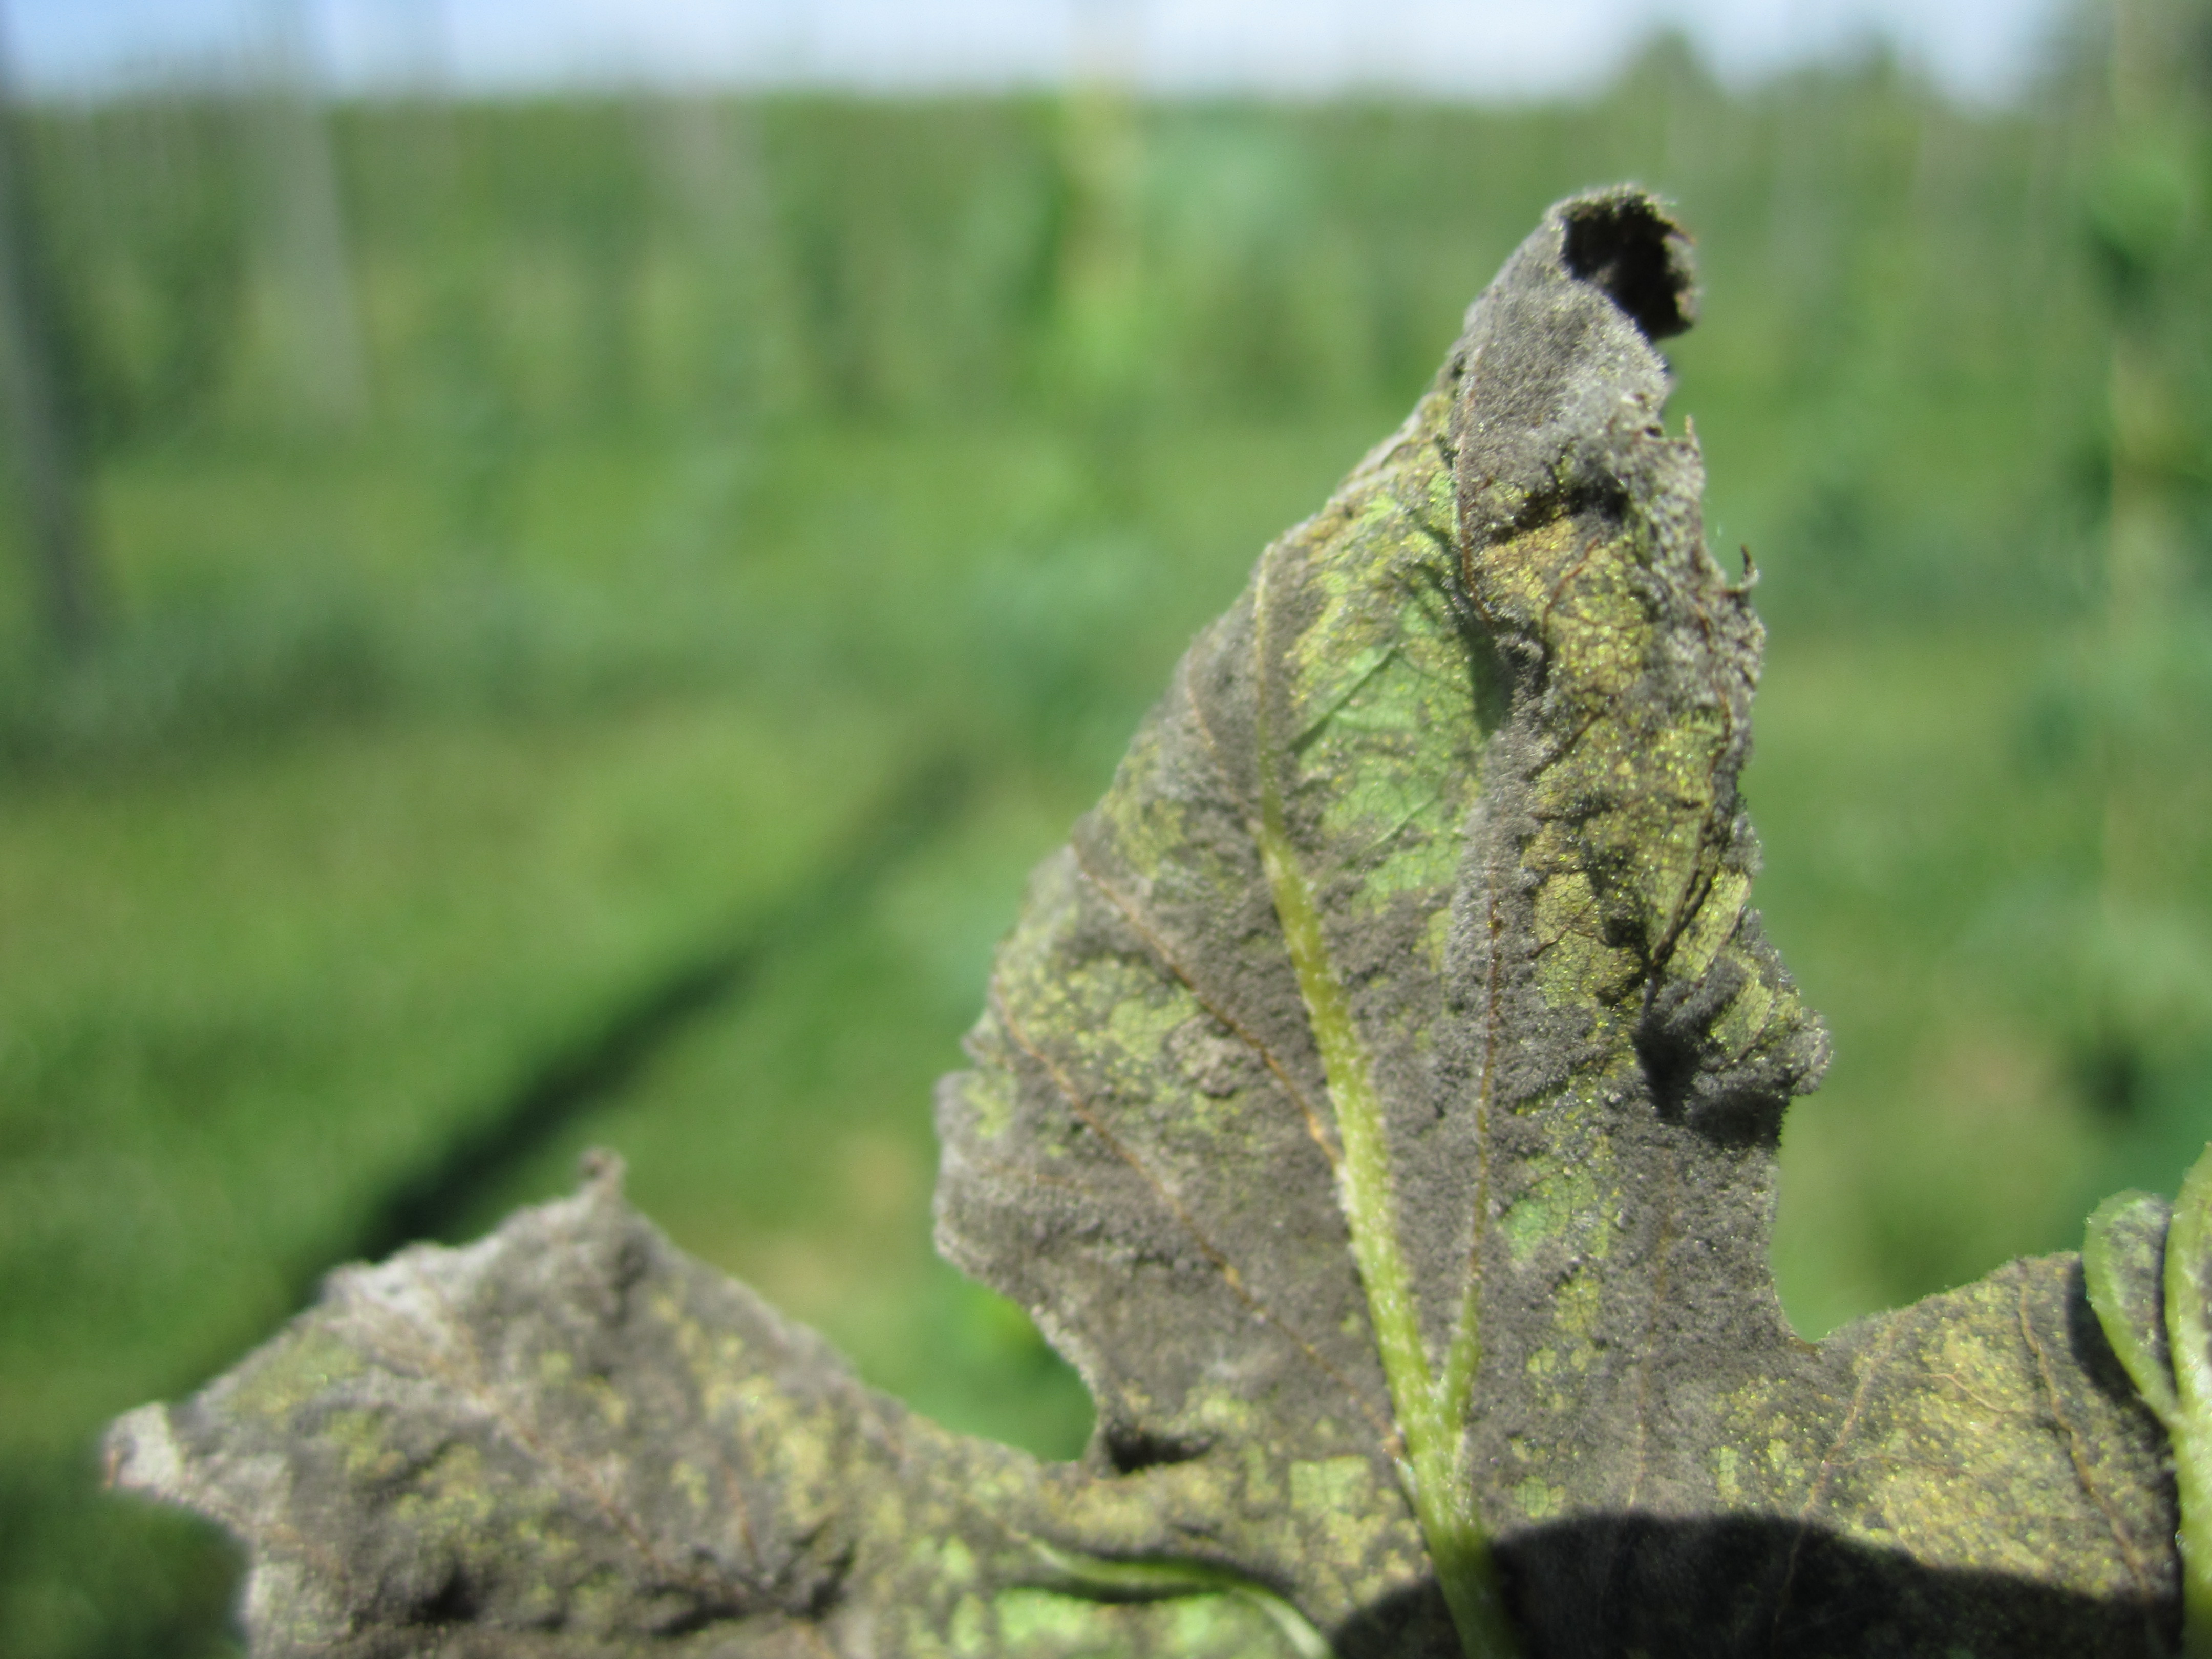 Downy mildew pathogen producing spores on the underside of a hop leaf.